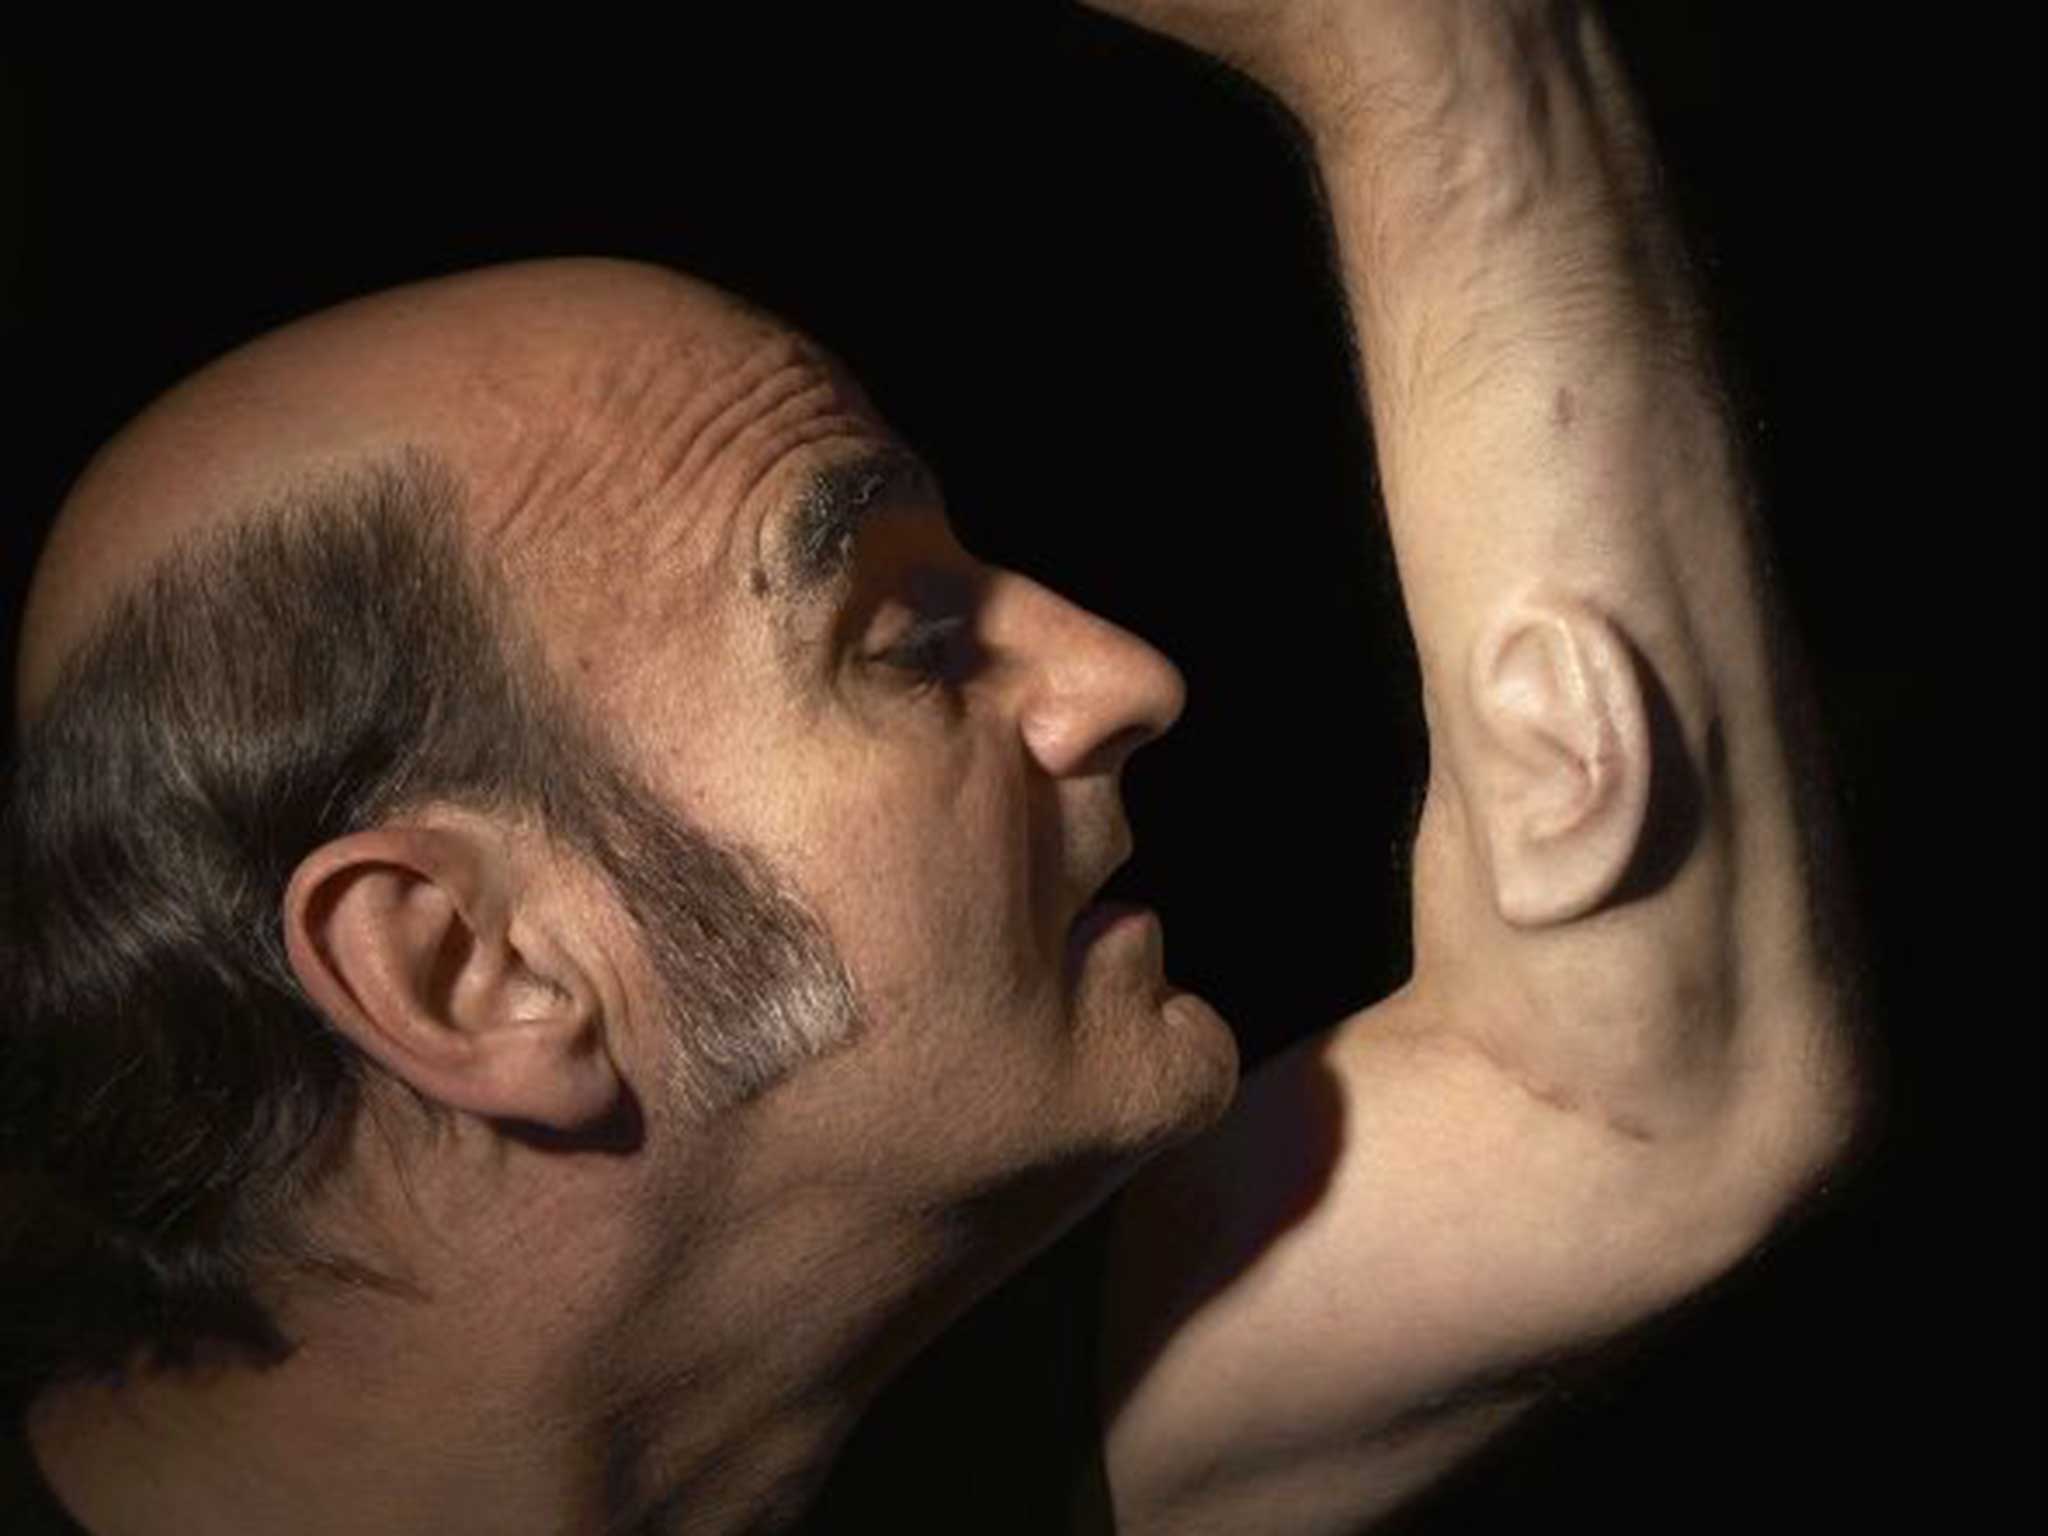 Stelarc plans to connect an ear he has been growing on his arm for years to the internet 